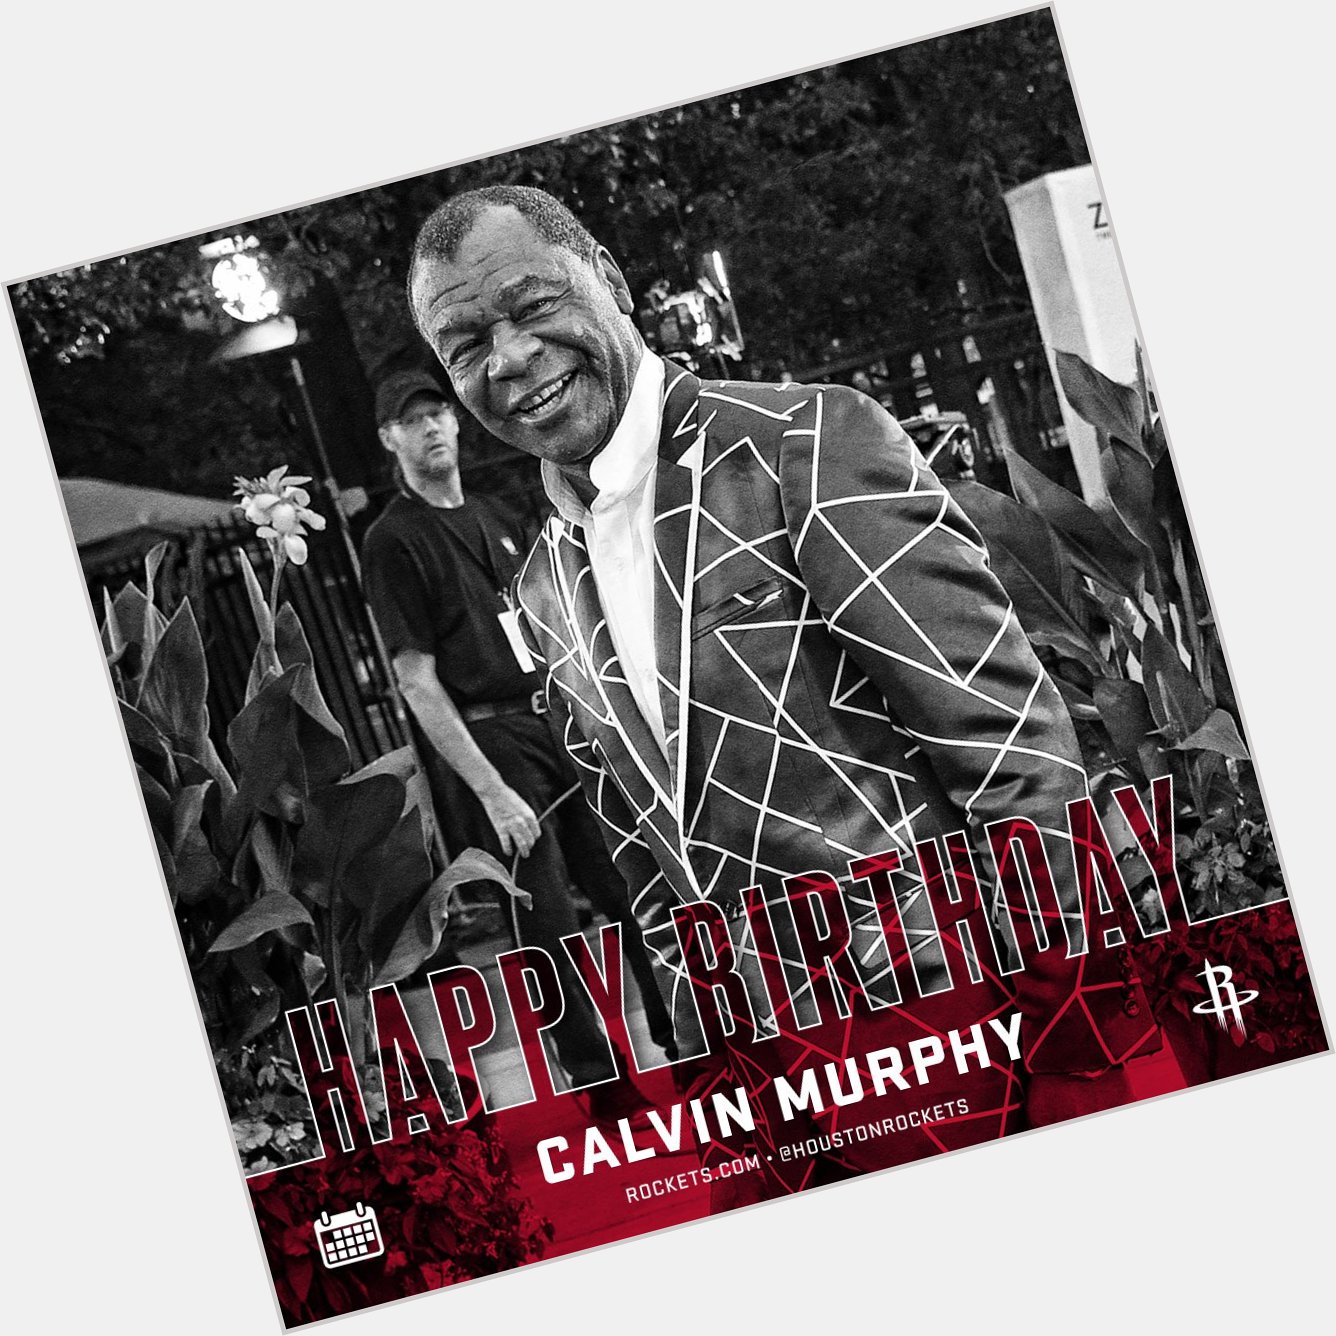 Remessage to wish Legend & Hall of Famer Calvin Murphy a happy birthday! 